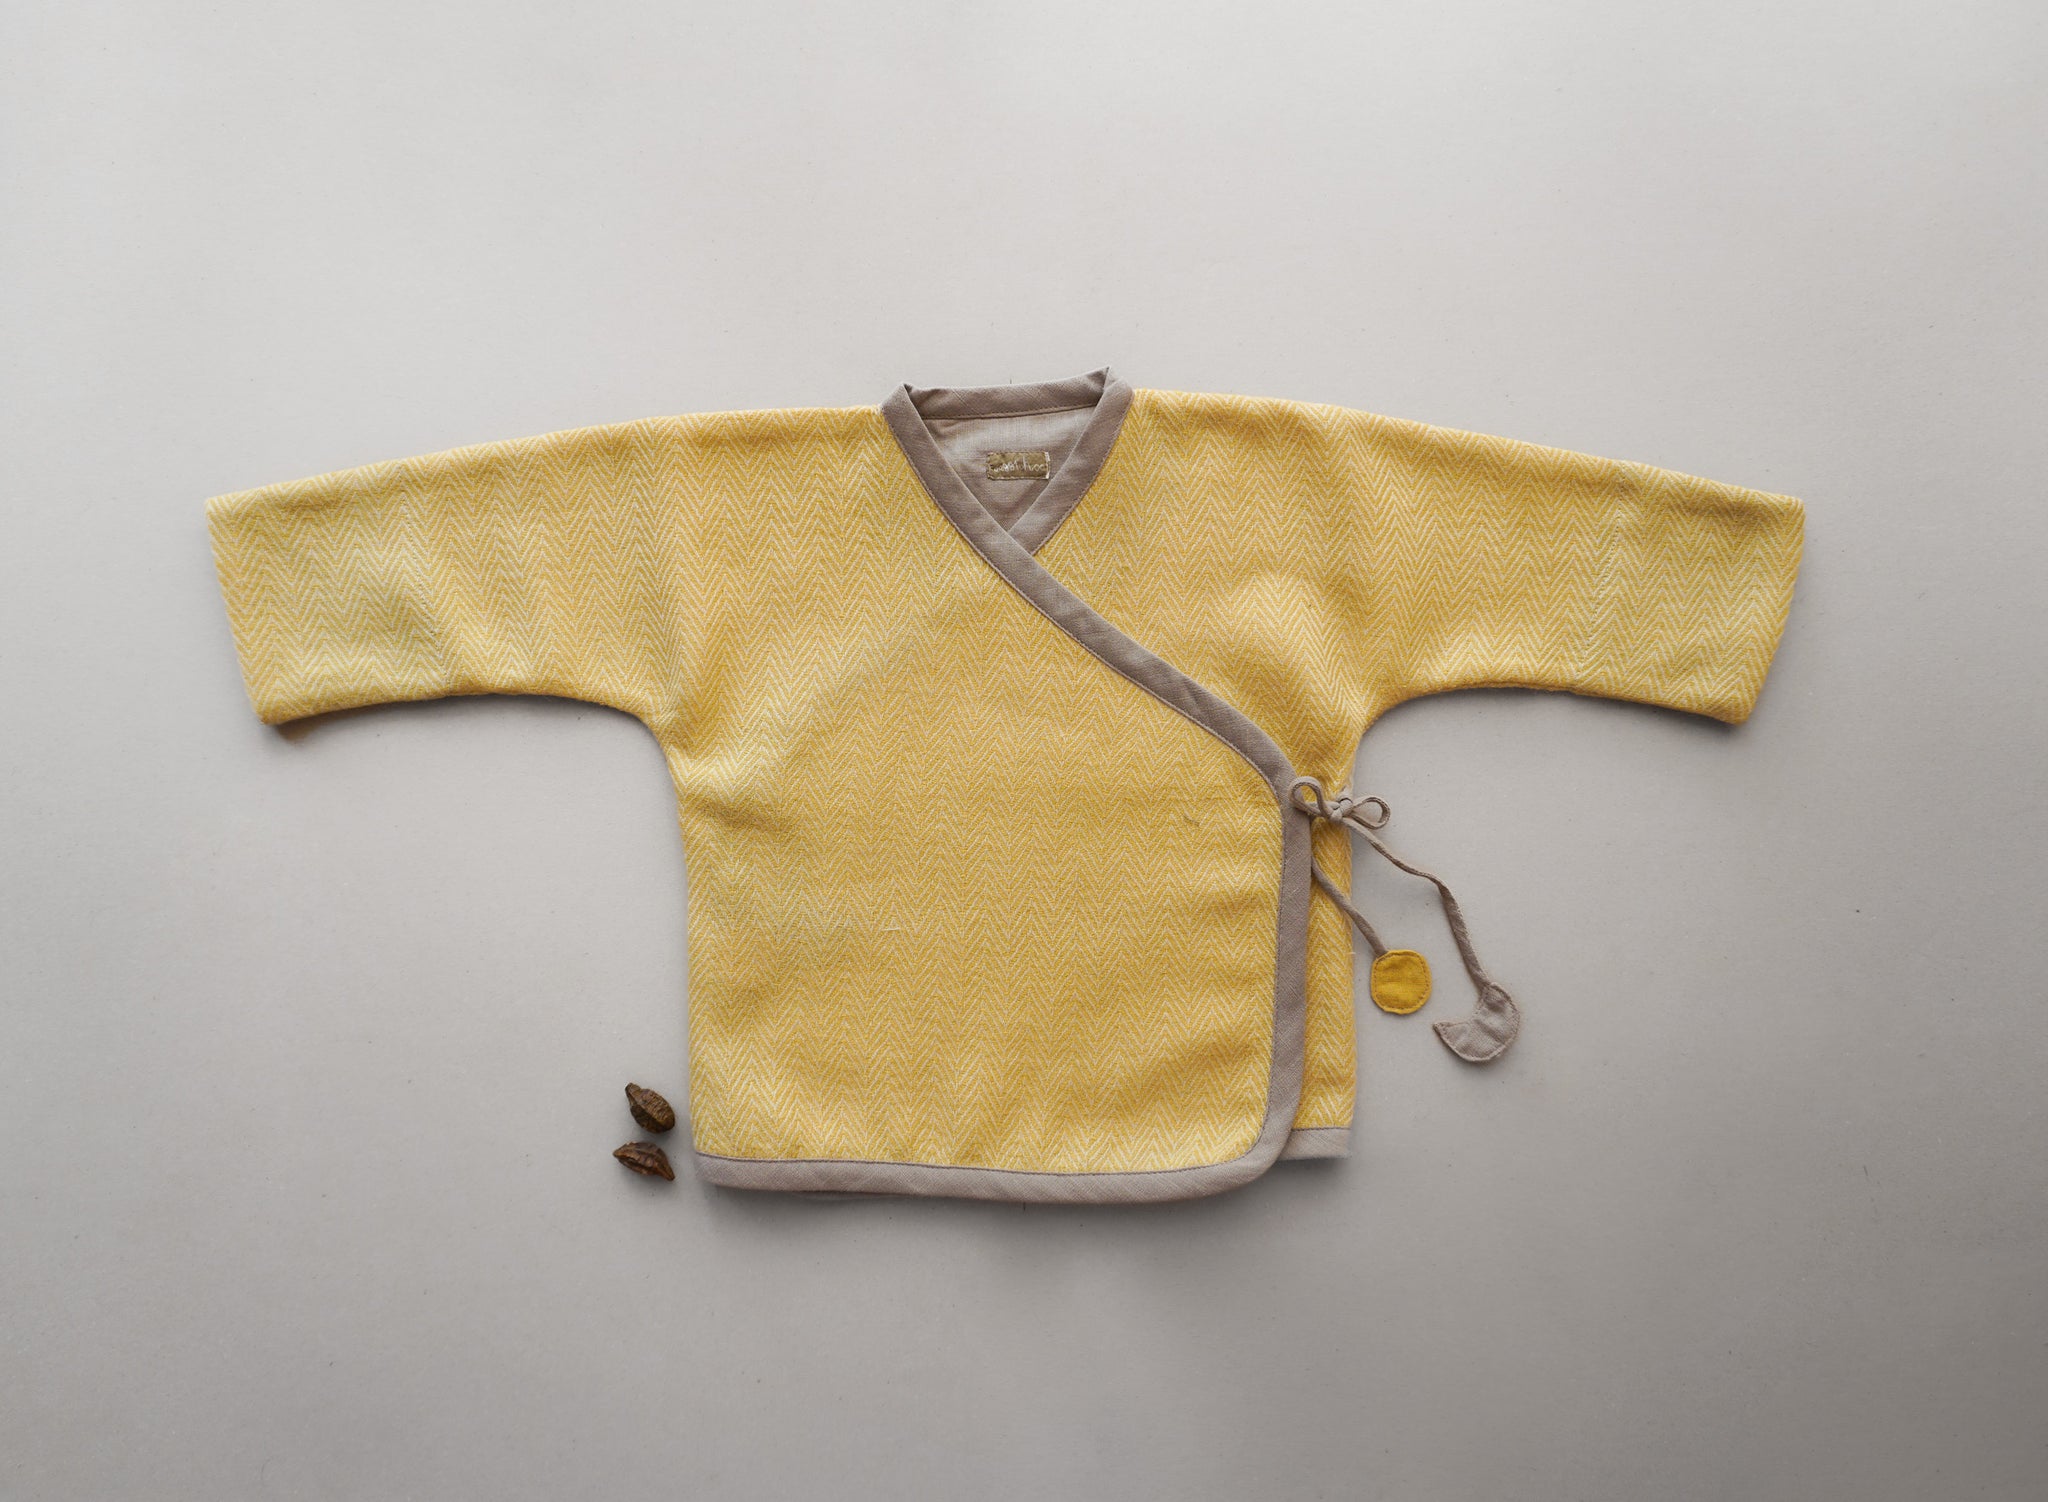 Vintage Wool Wrap - Baby Sweater - Yellow